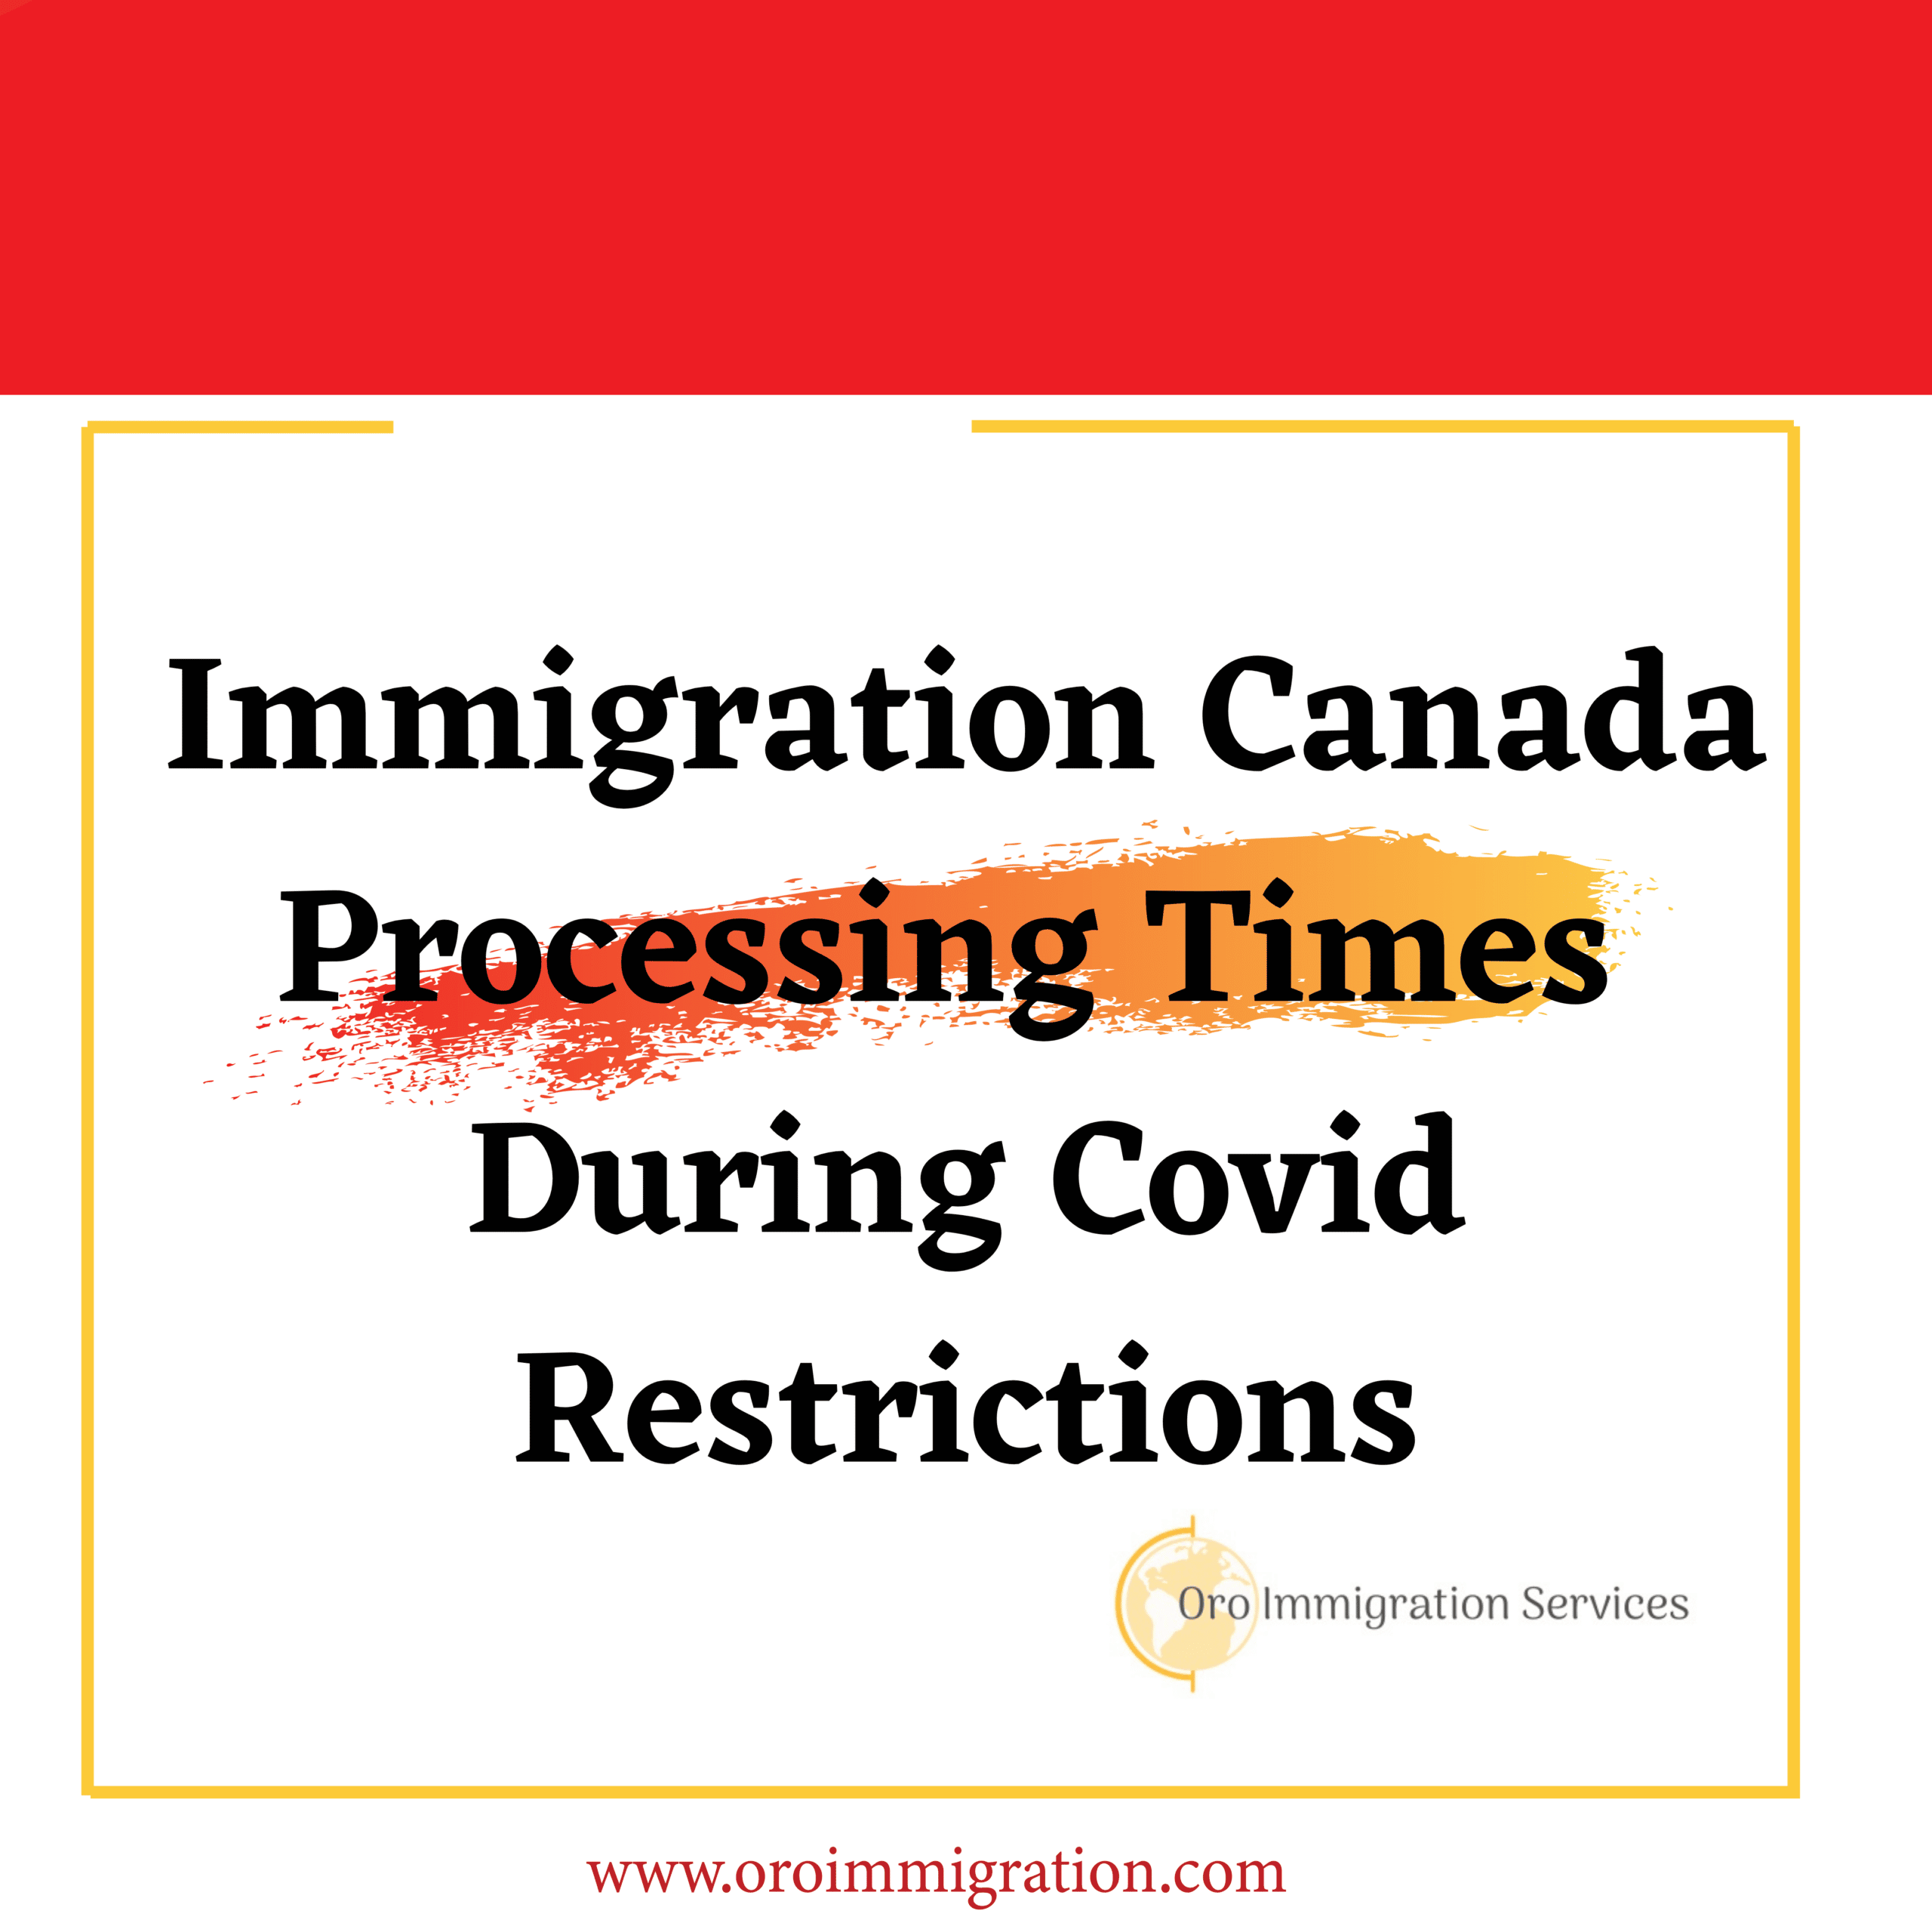 Text saying "Immigration Canada Processing Times During Covid Restrictions" above white background